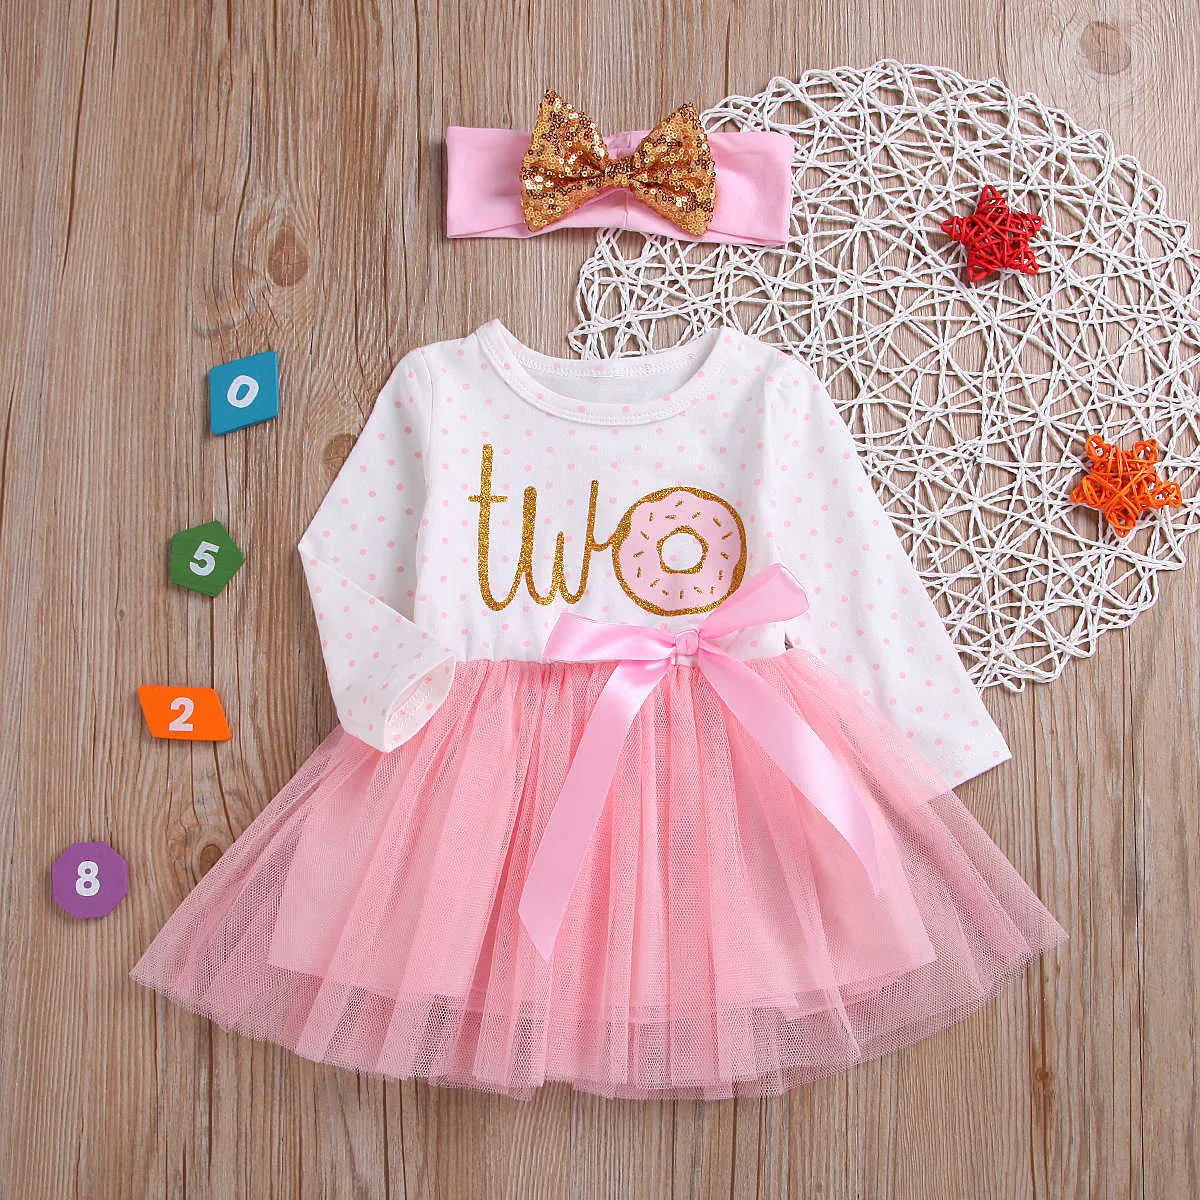 infantil baby striped 1st 2nd 3rd birthday smash cake dress little girls long sleeve tutu casual outfit for toddlers 210529